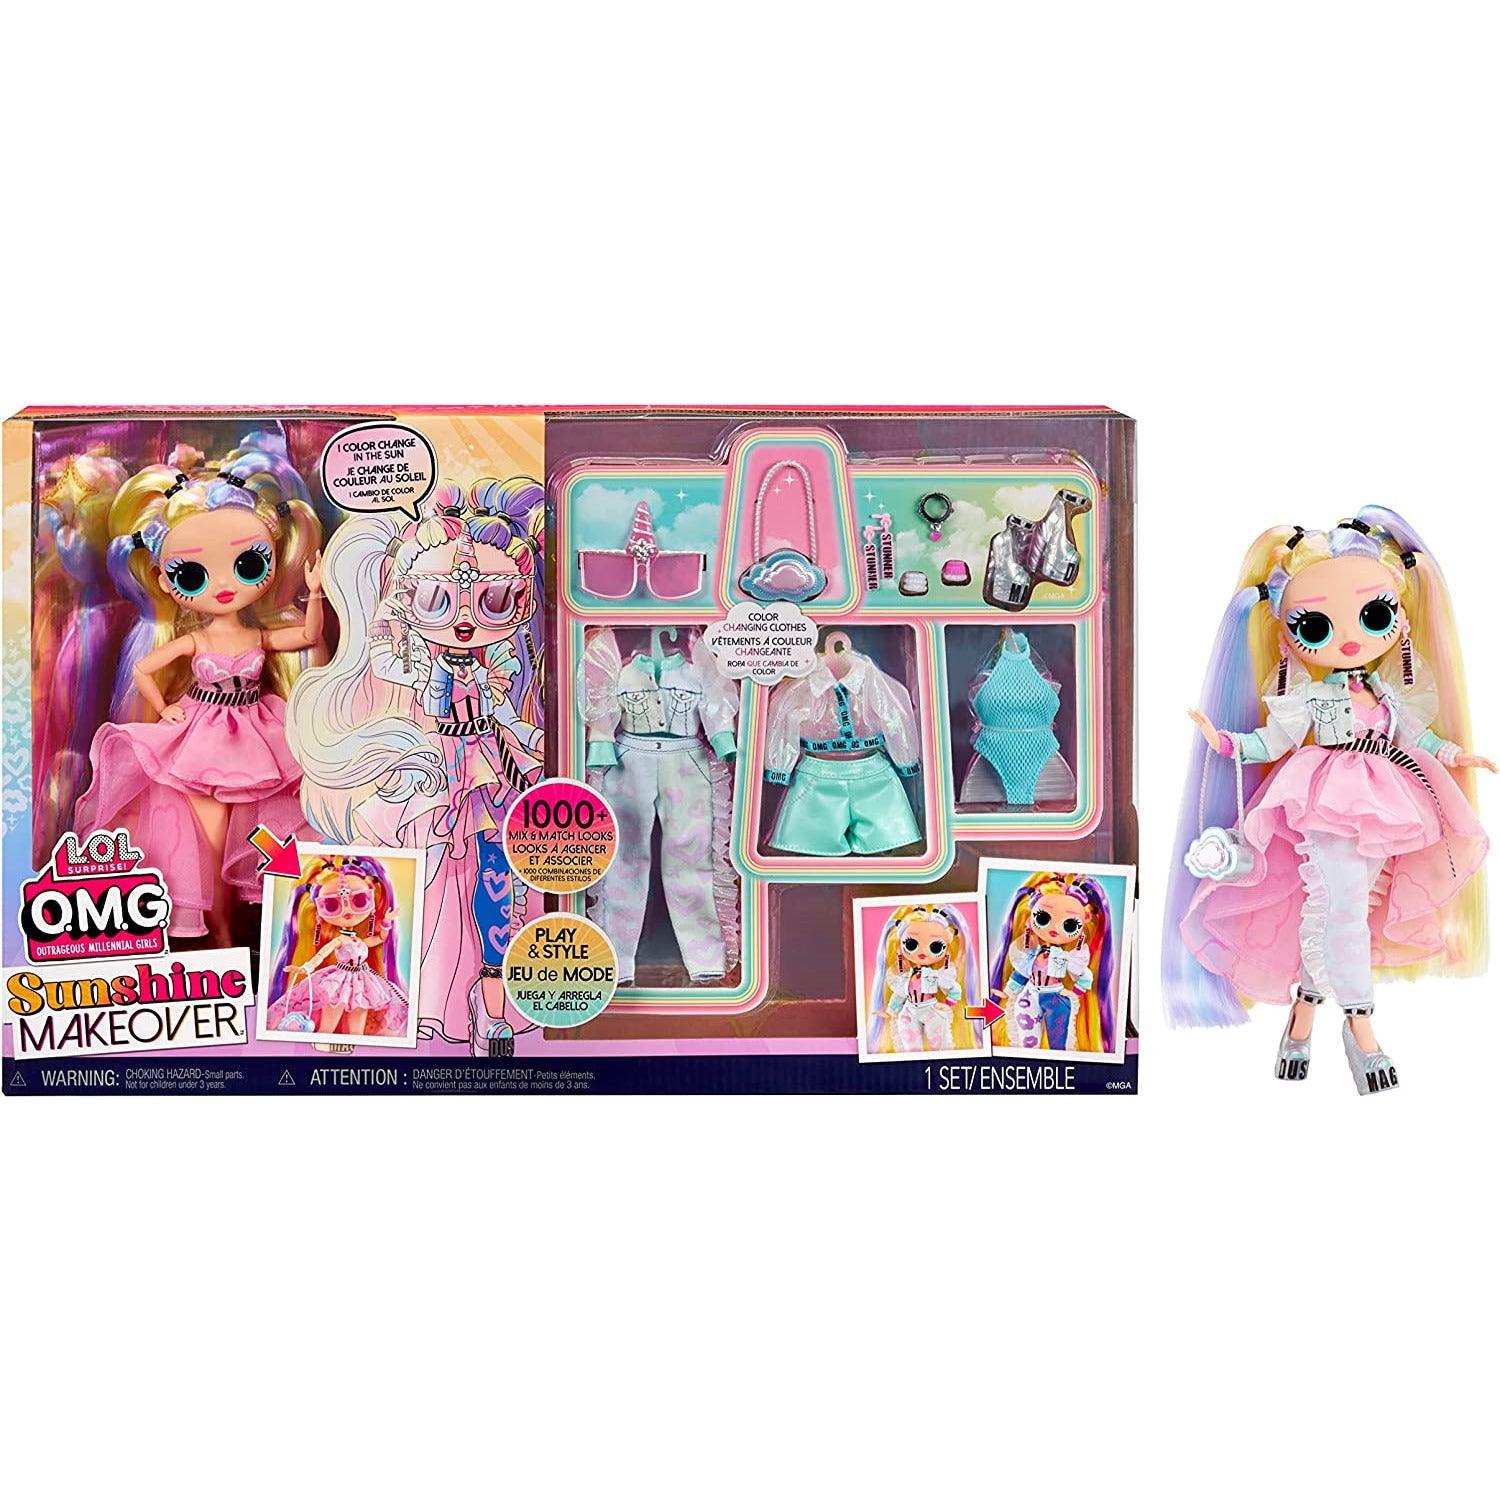 LOL Surprise OMG Sunshine Color Change Stellar Gurl Fashion Doll with Color Change Hair and Fashions and Multiple Surprises - BumbleToys - 5-7 Years, Dolls, Girls, L.O.L, Miniature Dolls & Accessories, OXE, Pre-Order